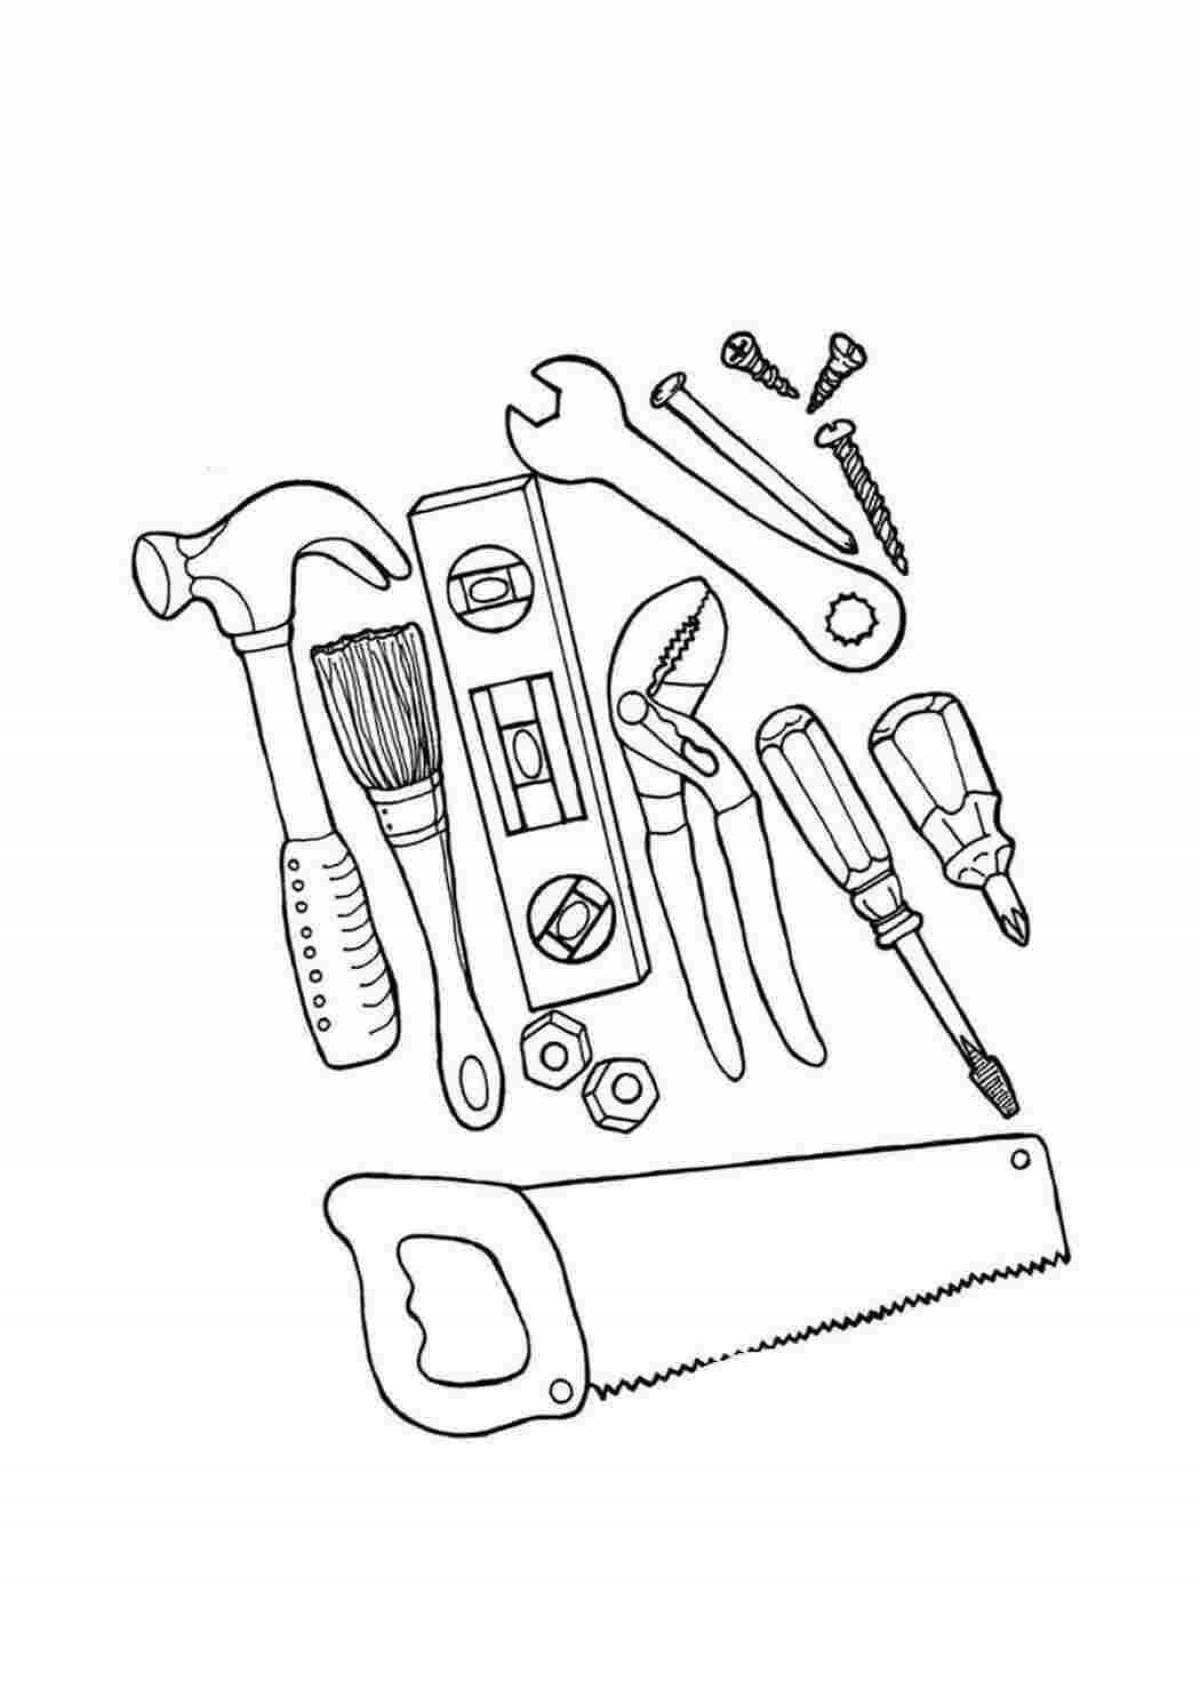 Coloring page of tools for 3-4 year olds